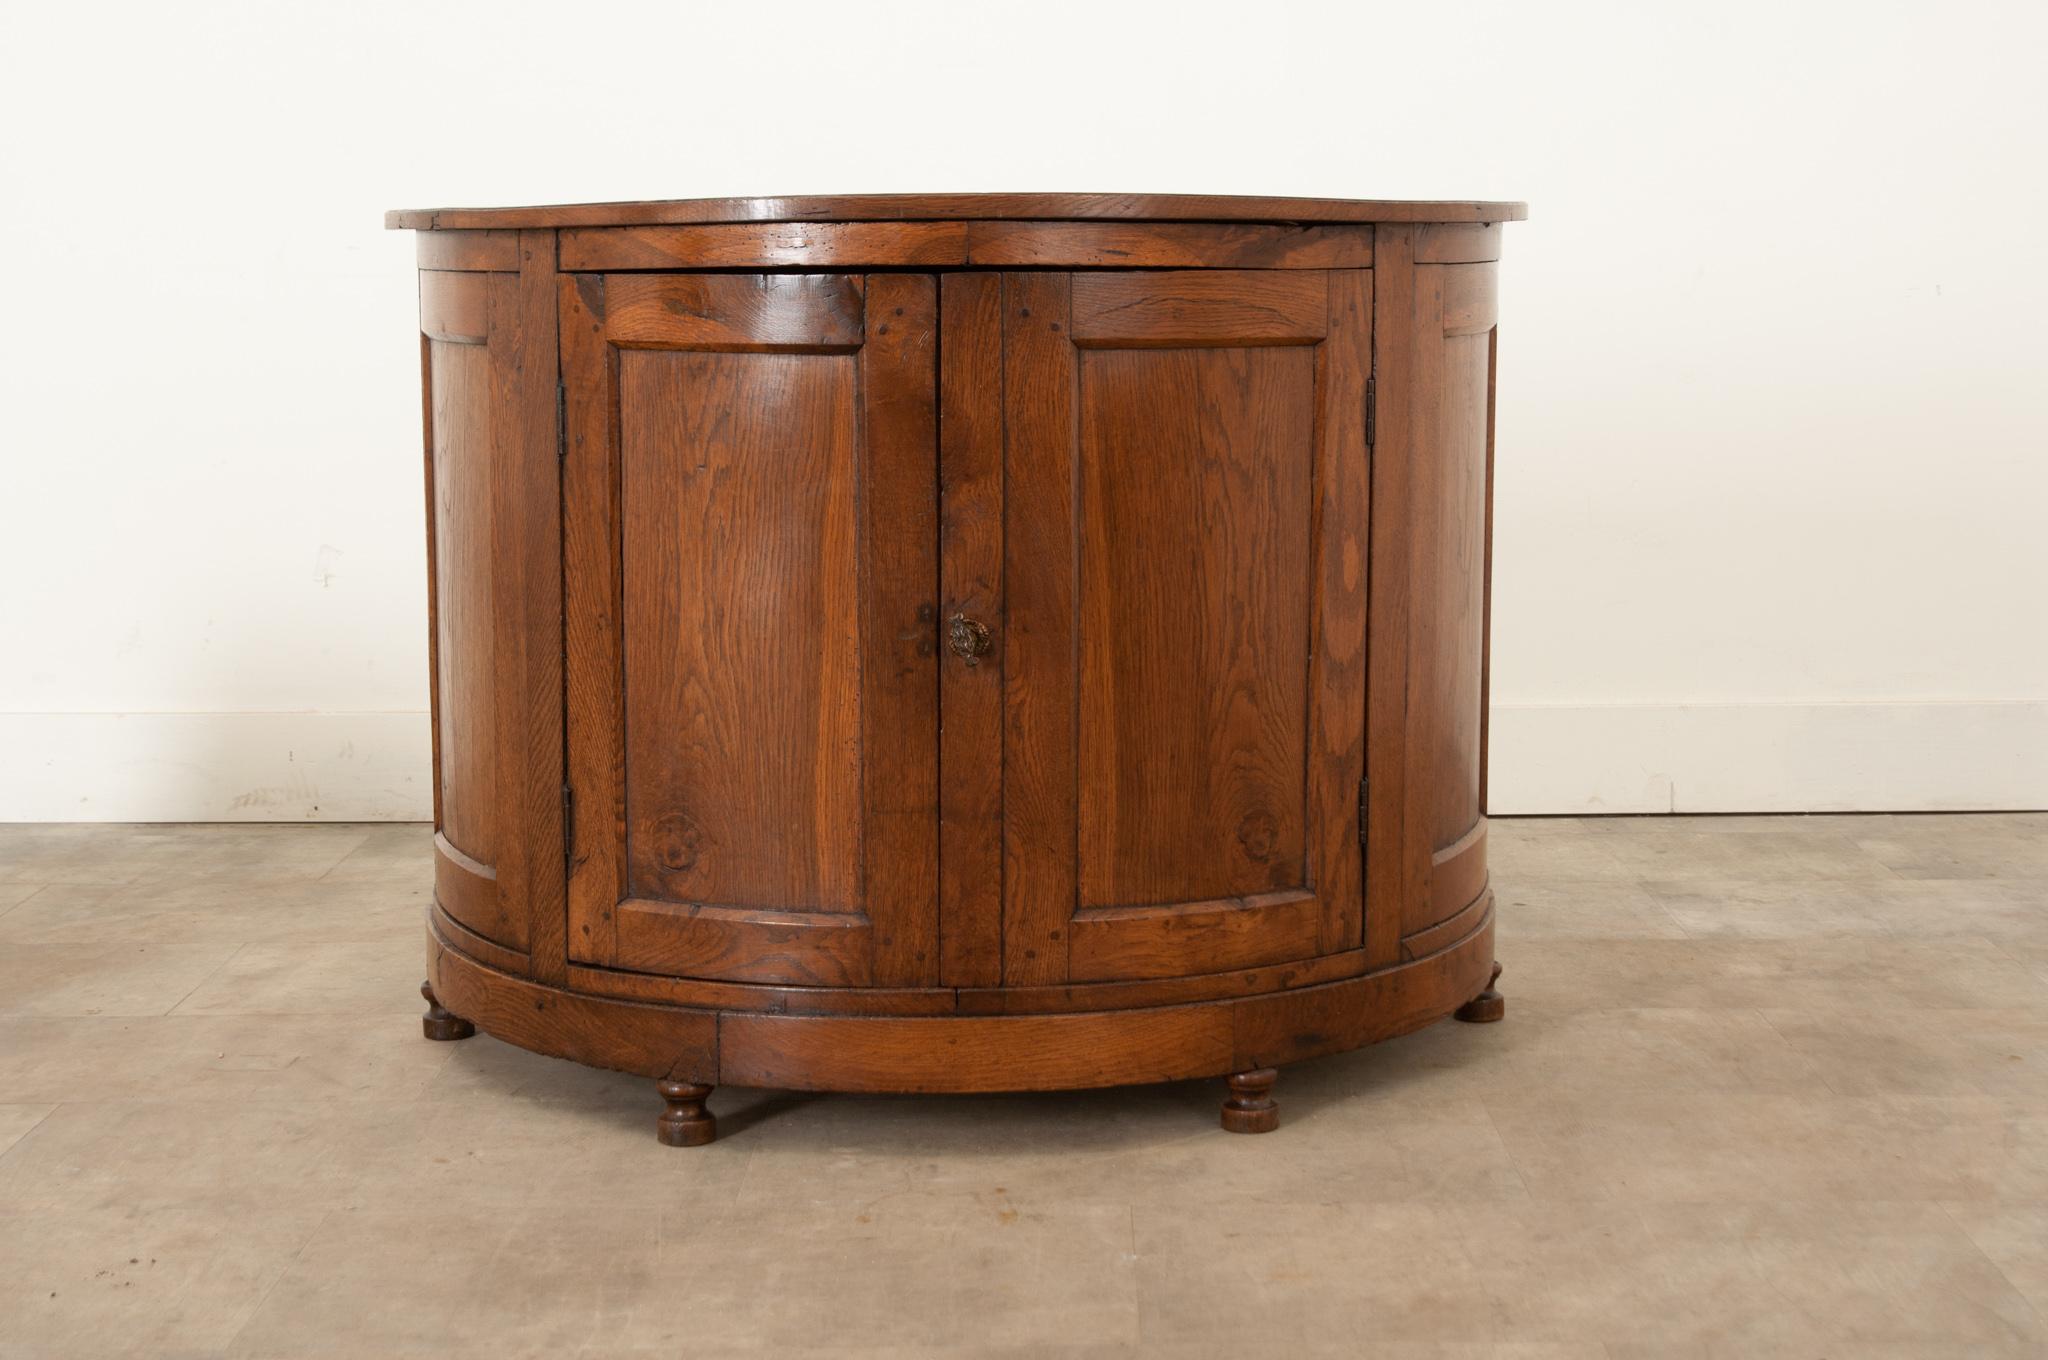 A 19th century solid oak buffet, made in France circa 1830. This piece is Demilune in shape, giving it a distinct, finished presence. Constructed of beautifully aged oak, two centre doors are hung on metal hinges and retain their original inside